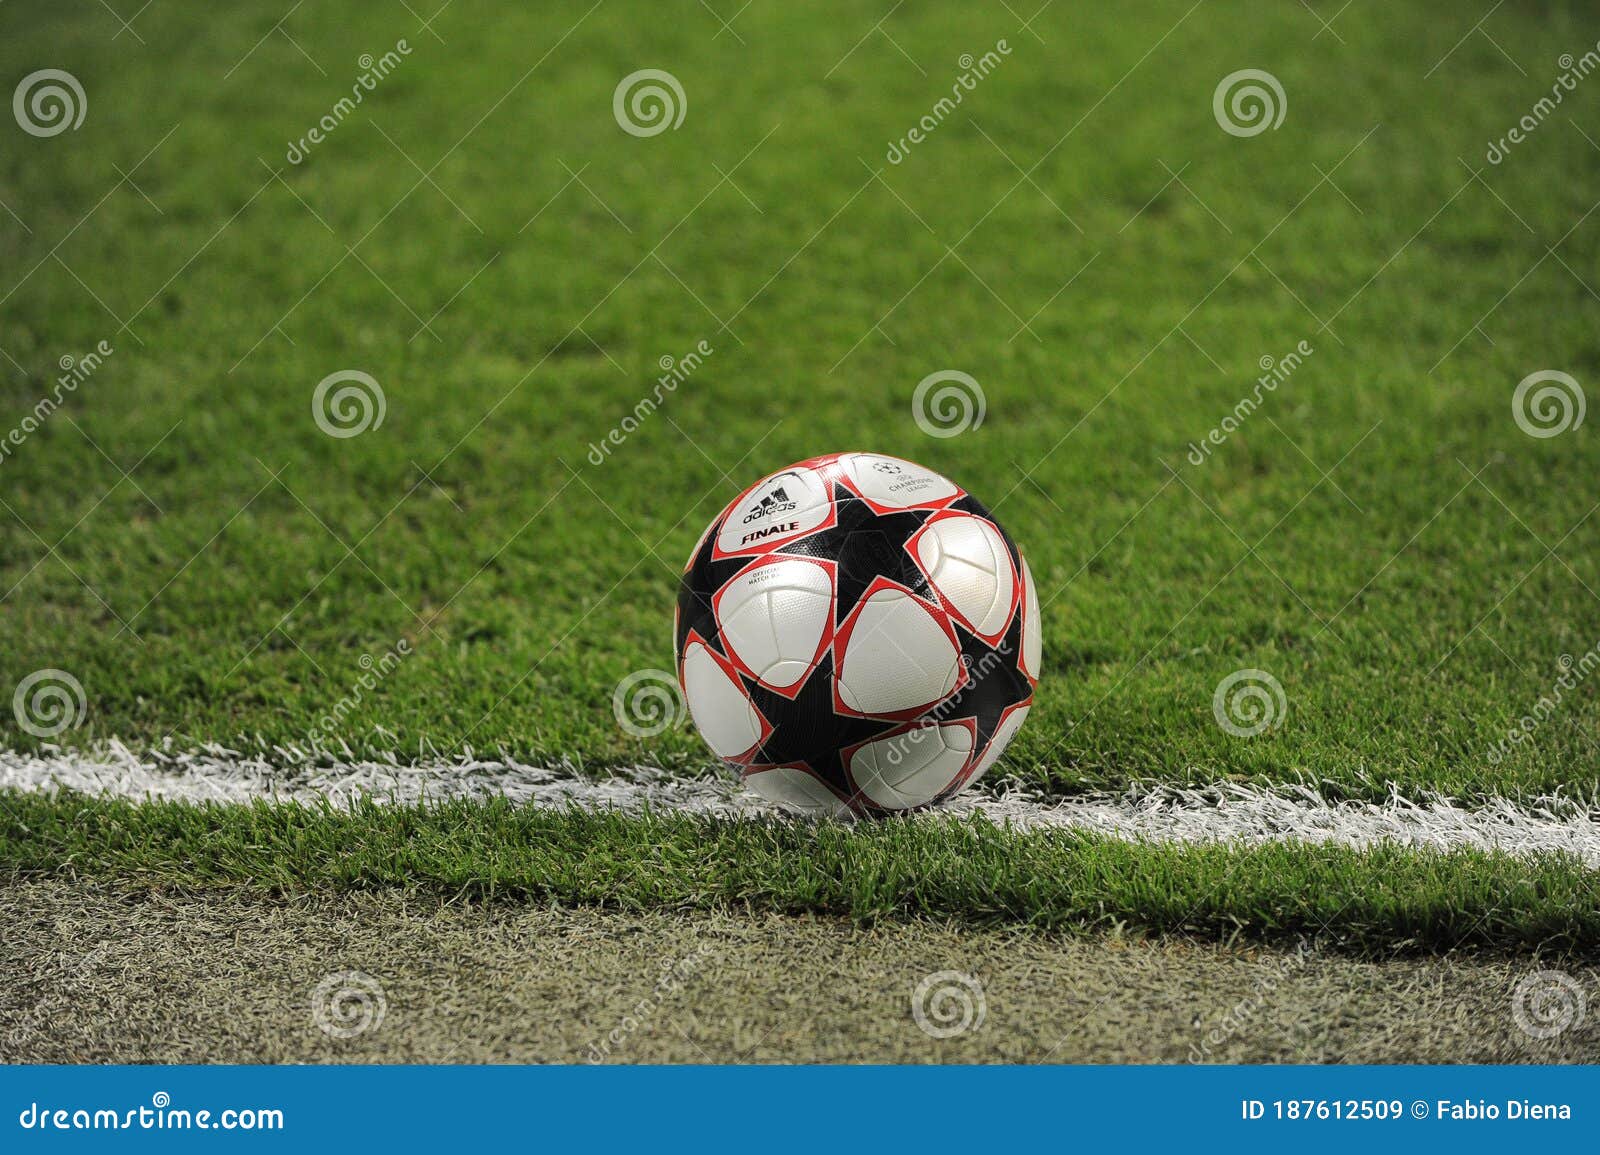 Soccer Ball UEFA Champions League Editorial Stock Image - Image of action,  match: 187612509